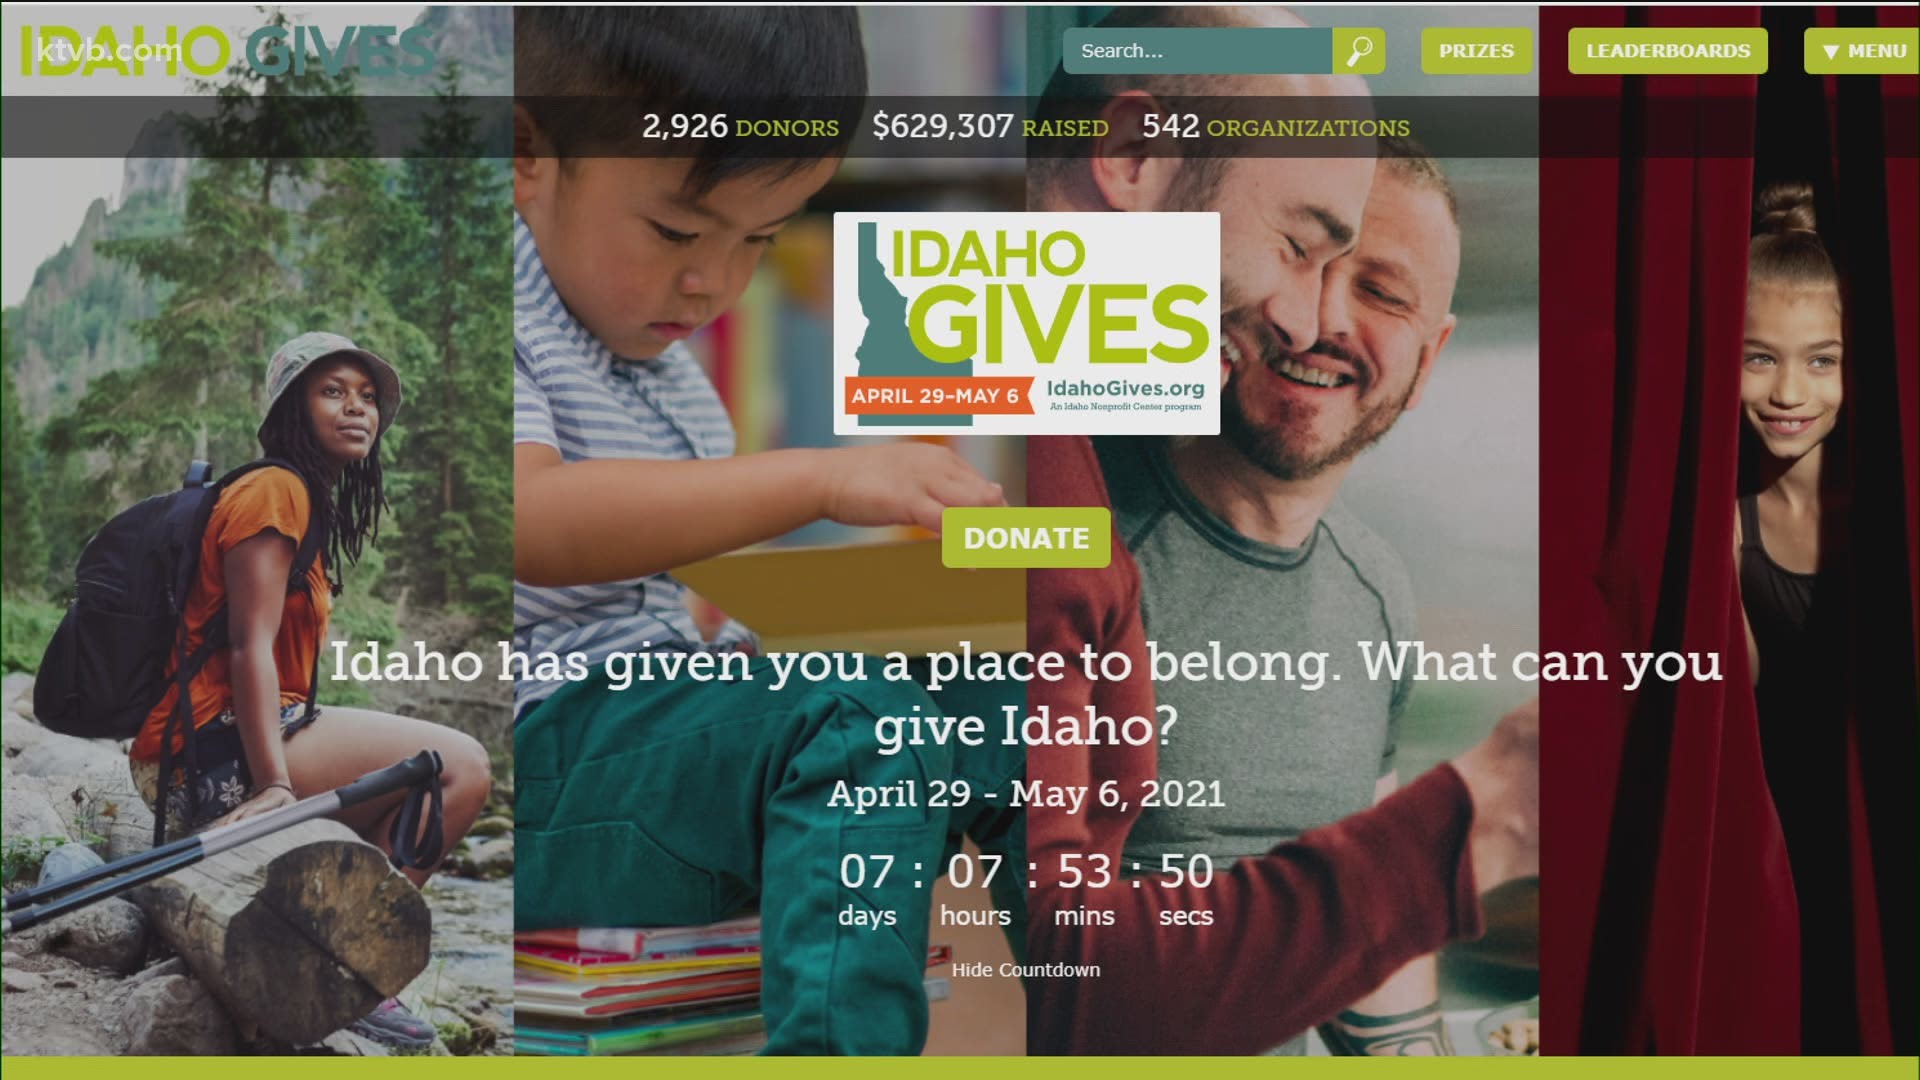 Idaho Gives got underway Thursday. More than 650 Idaho nonprofits are signed up to take part this year.